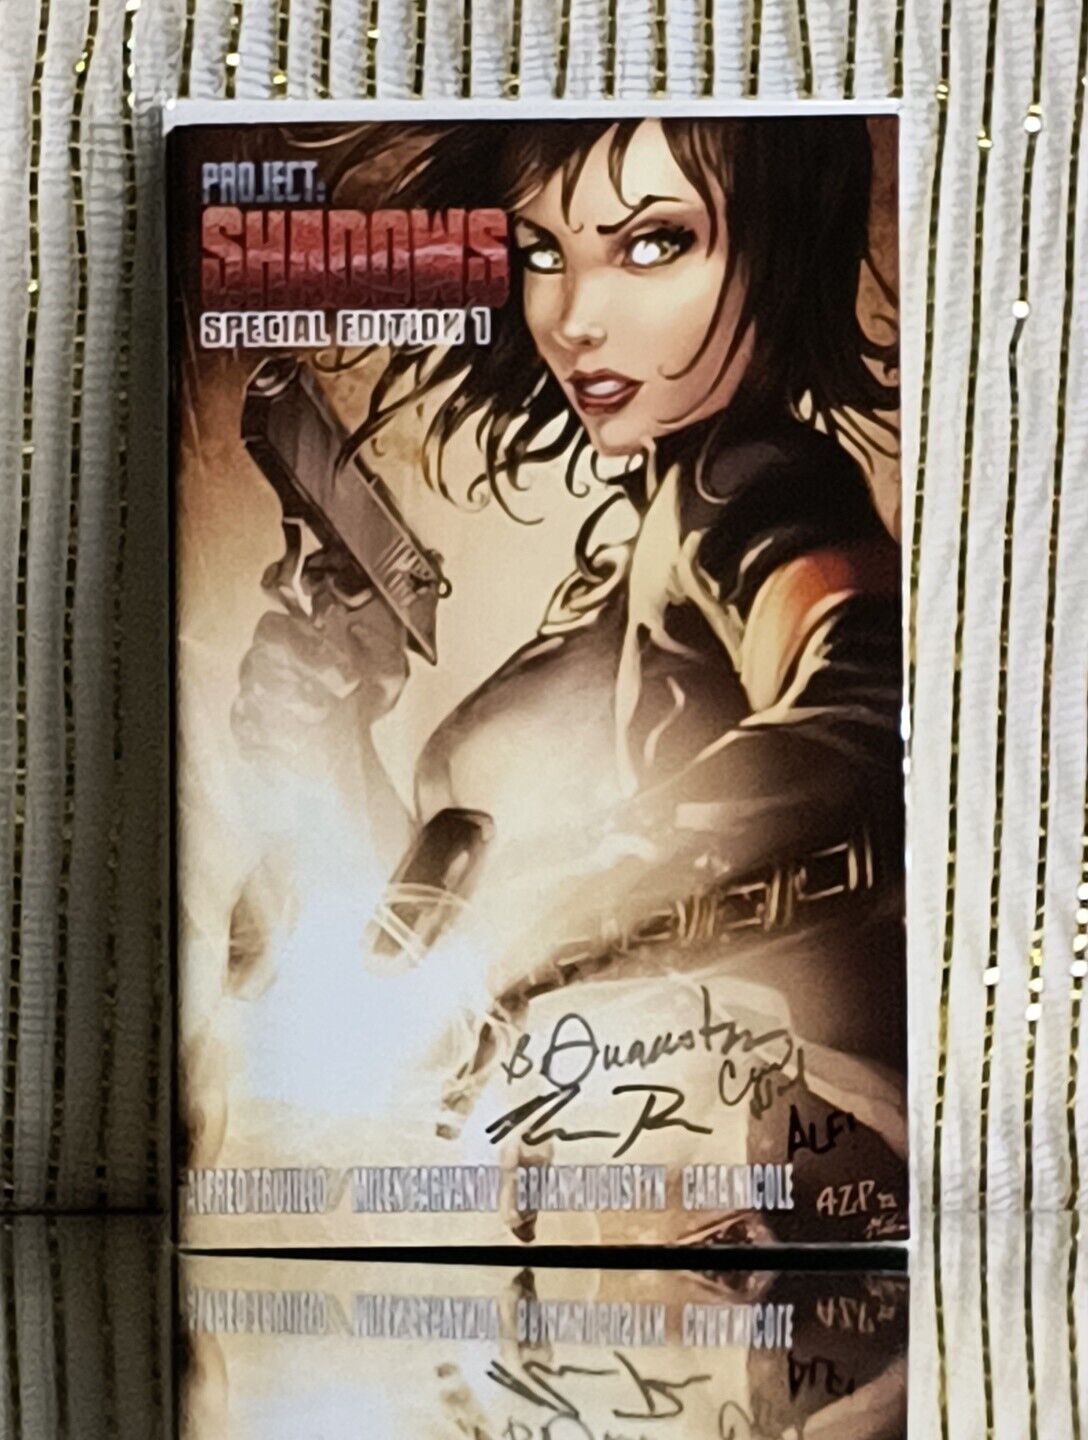 Signed Project:Shadows Special Edition #1 By Complete Cast